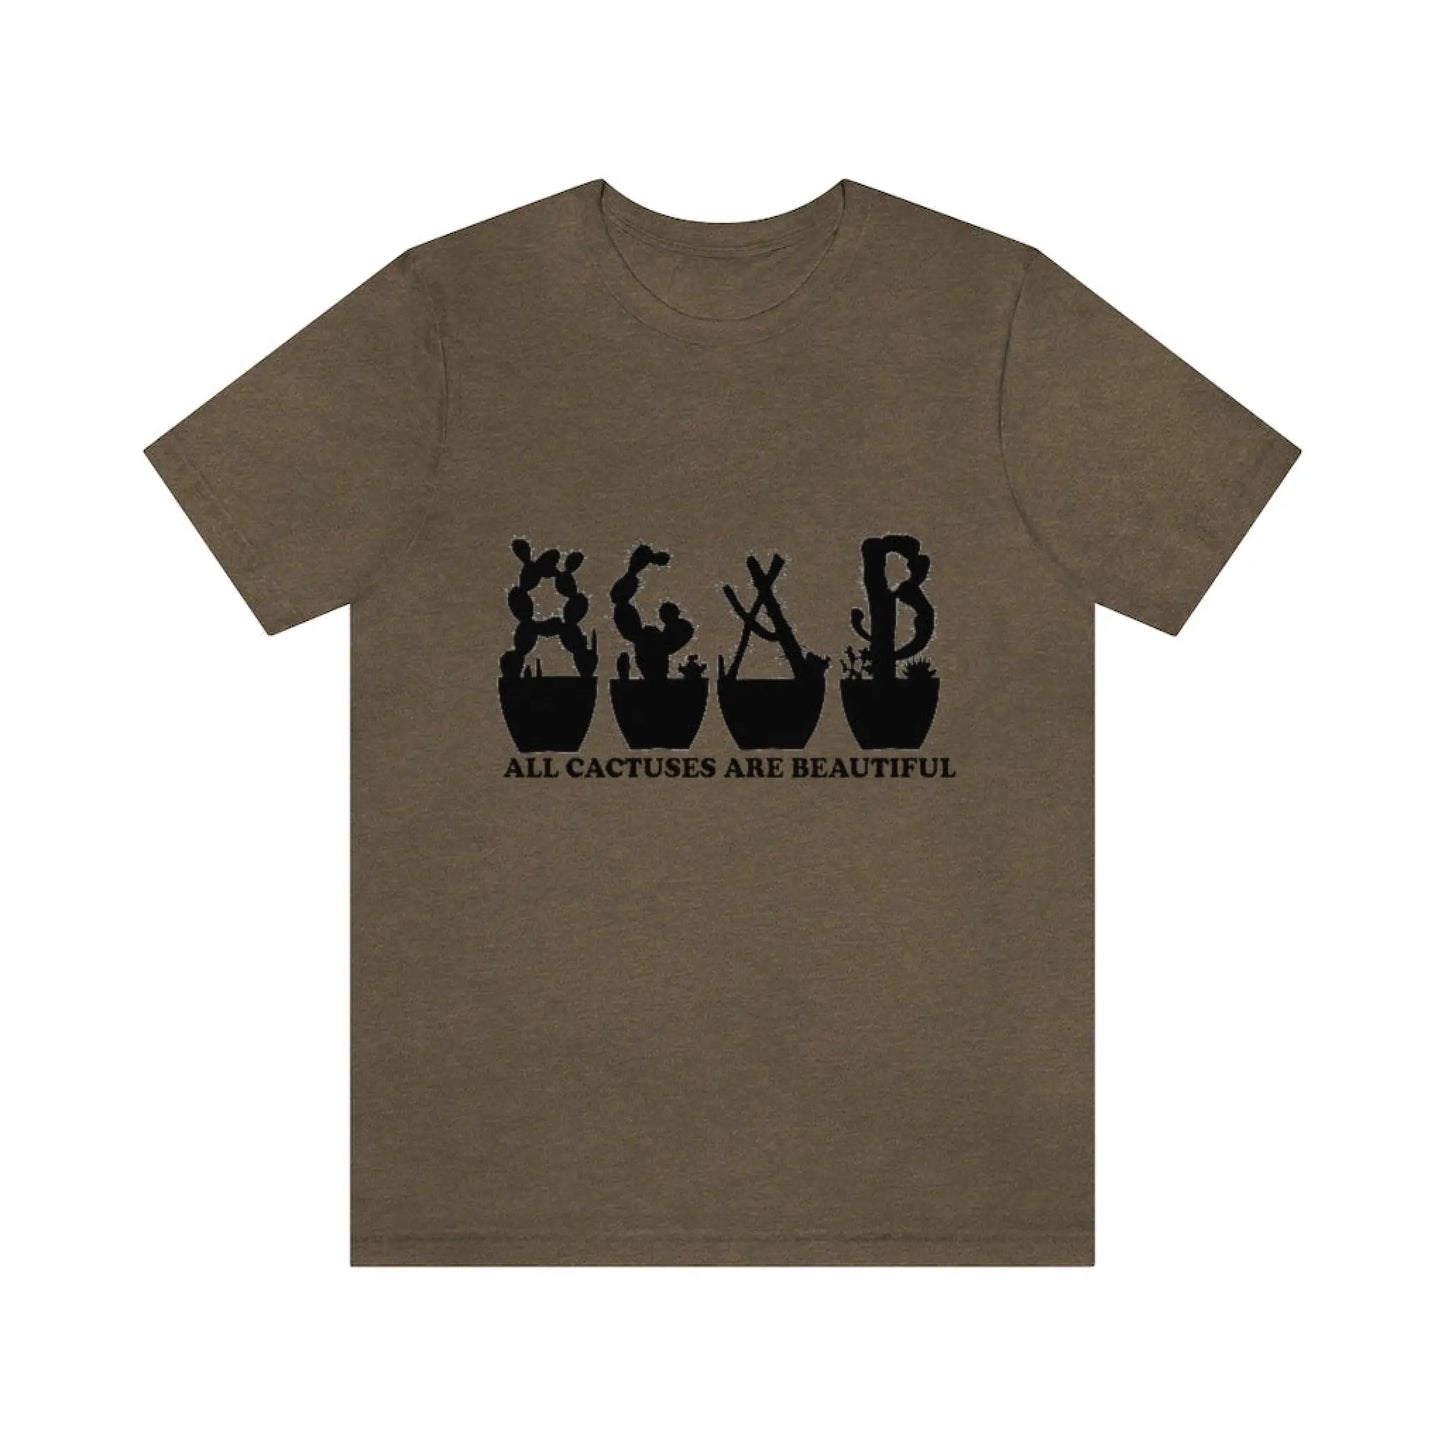 Shirts XL - All Cactuses Are Beautiful - Heather Olive /